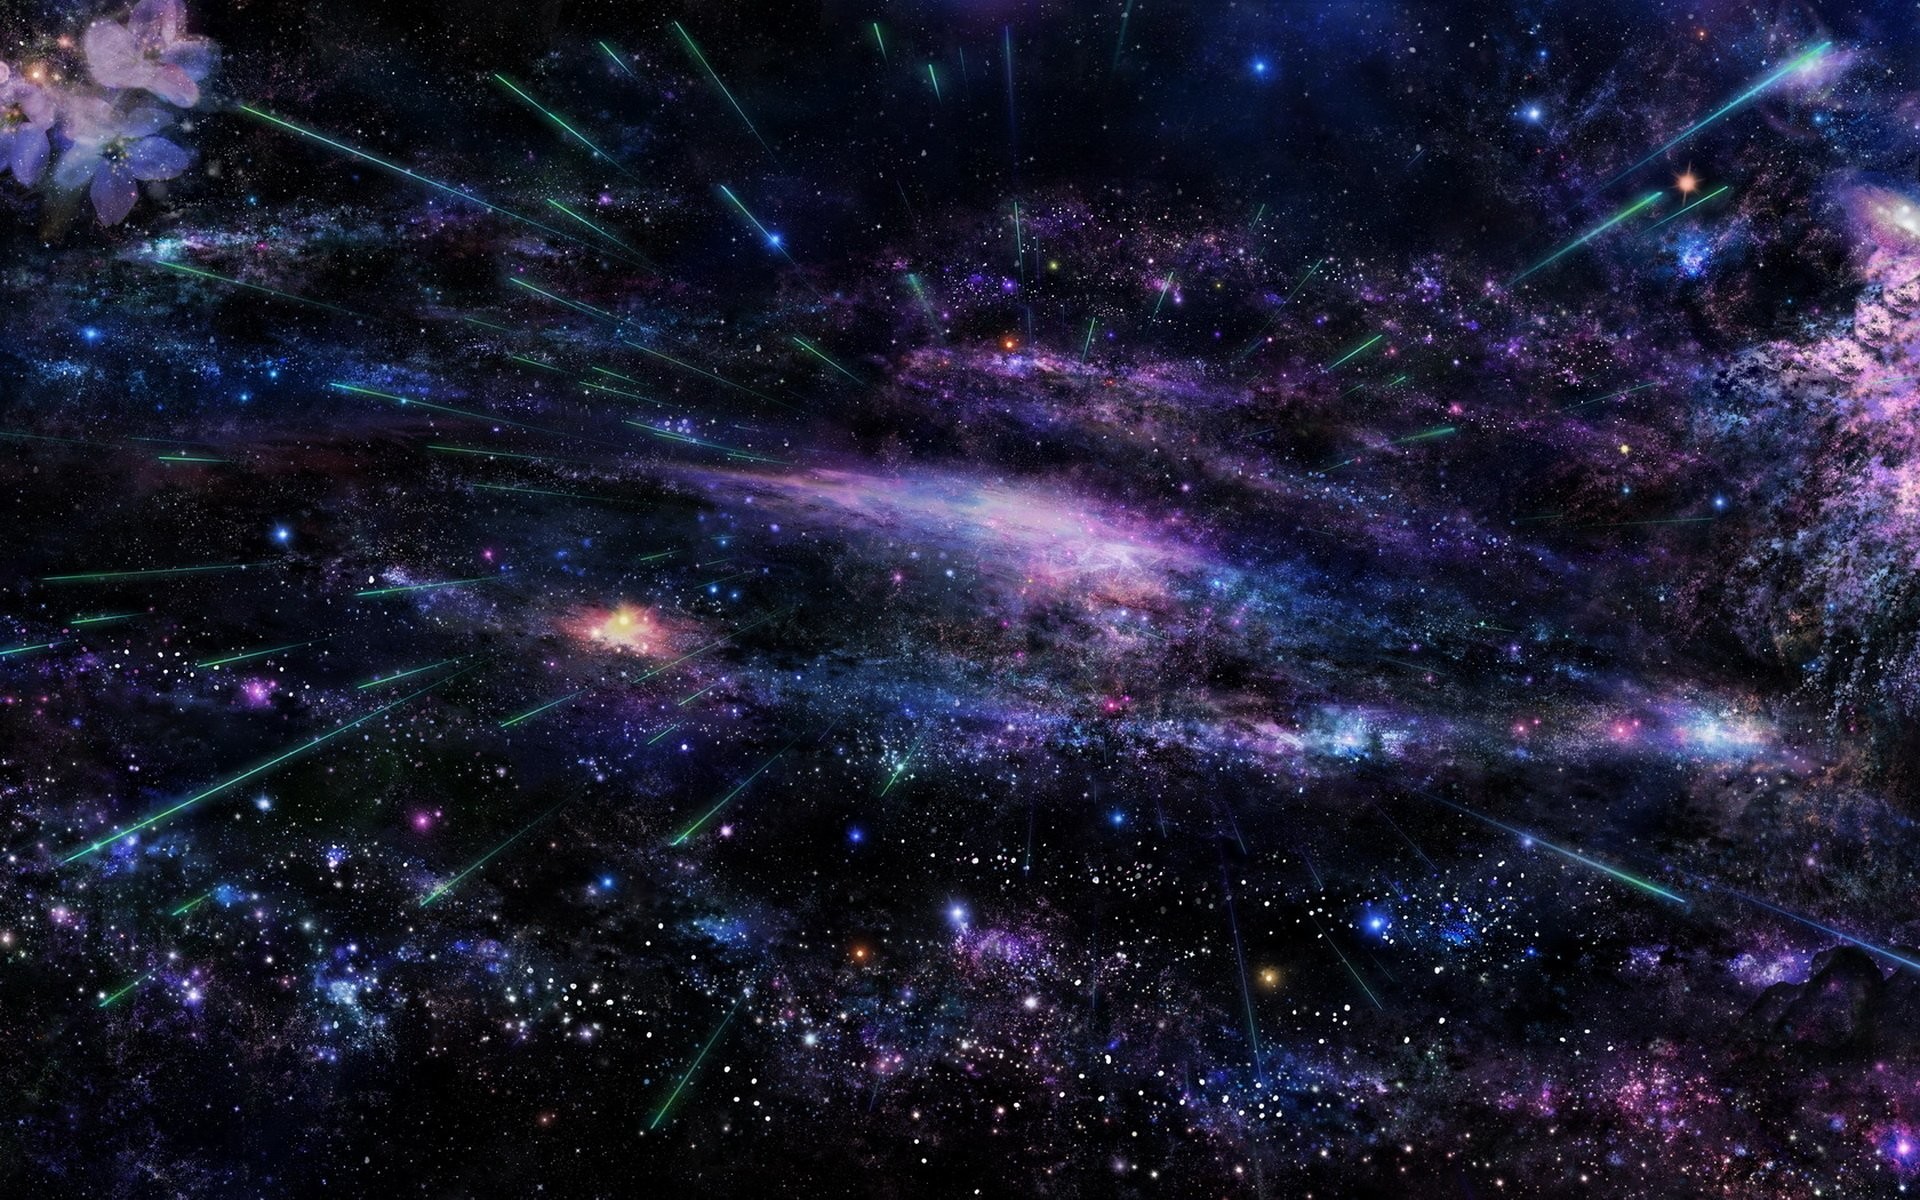 1920x1200 wallpaper of universe 33 Free HD Universe Backgrounds For Desktops, Laptops  and Tablets